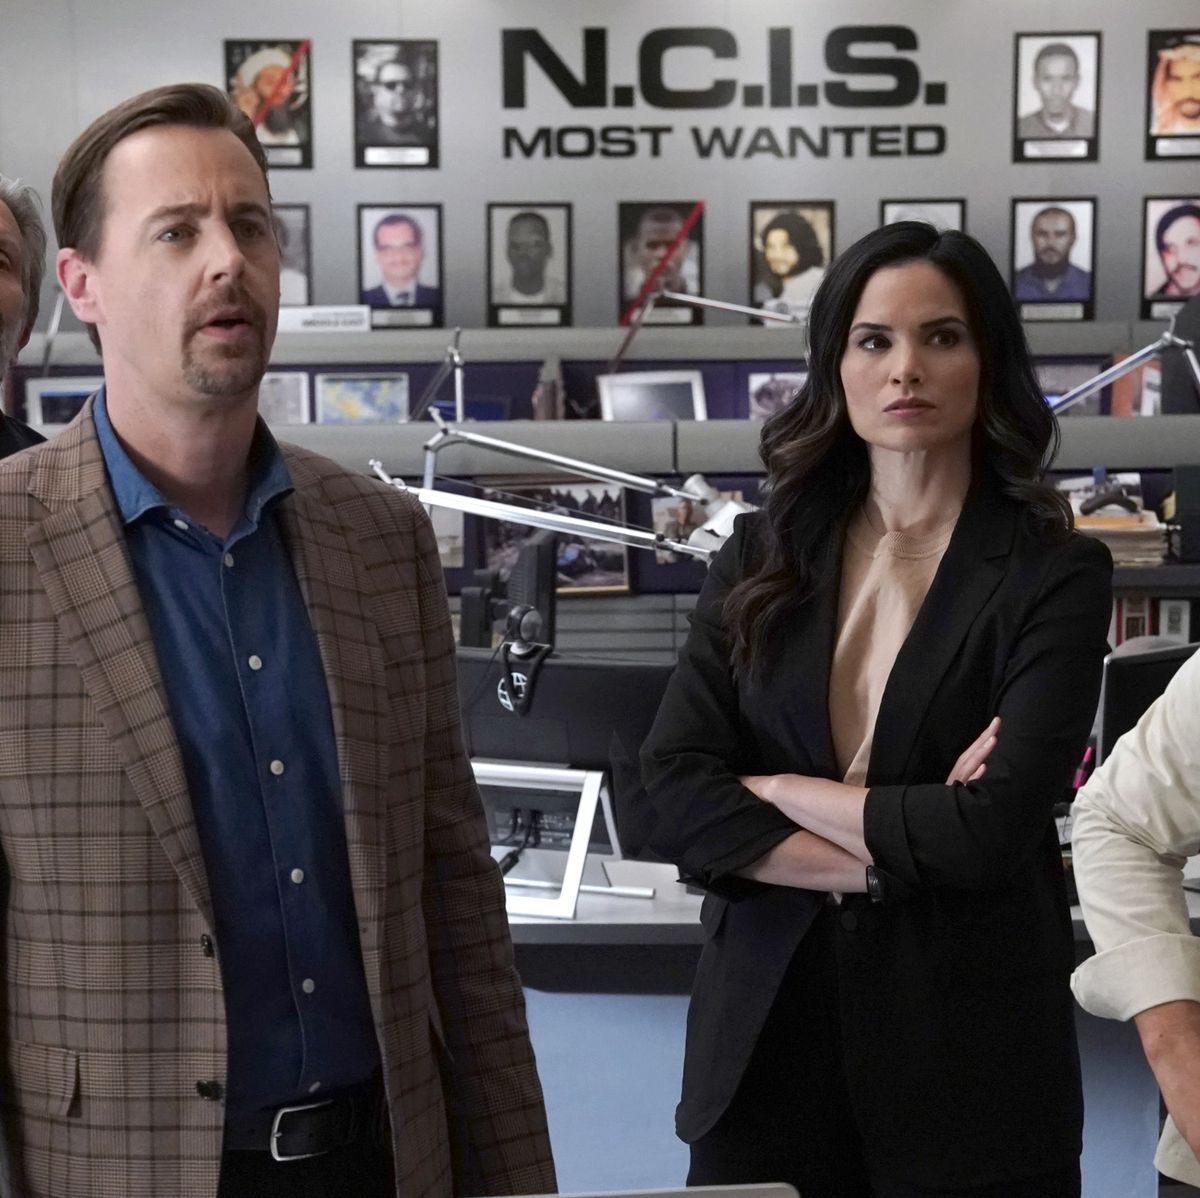 NCIS cast show behind-the-scenes as season 20 starts filming